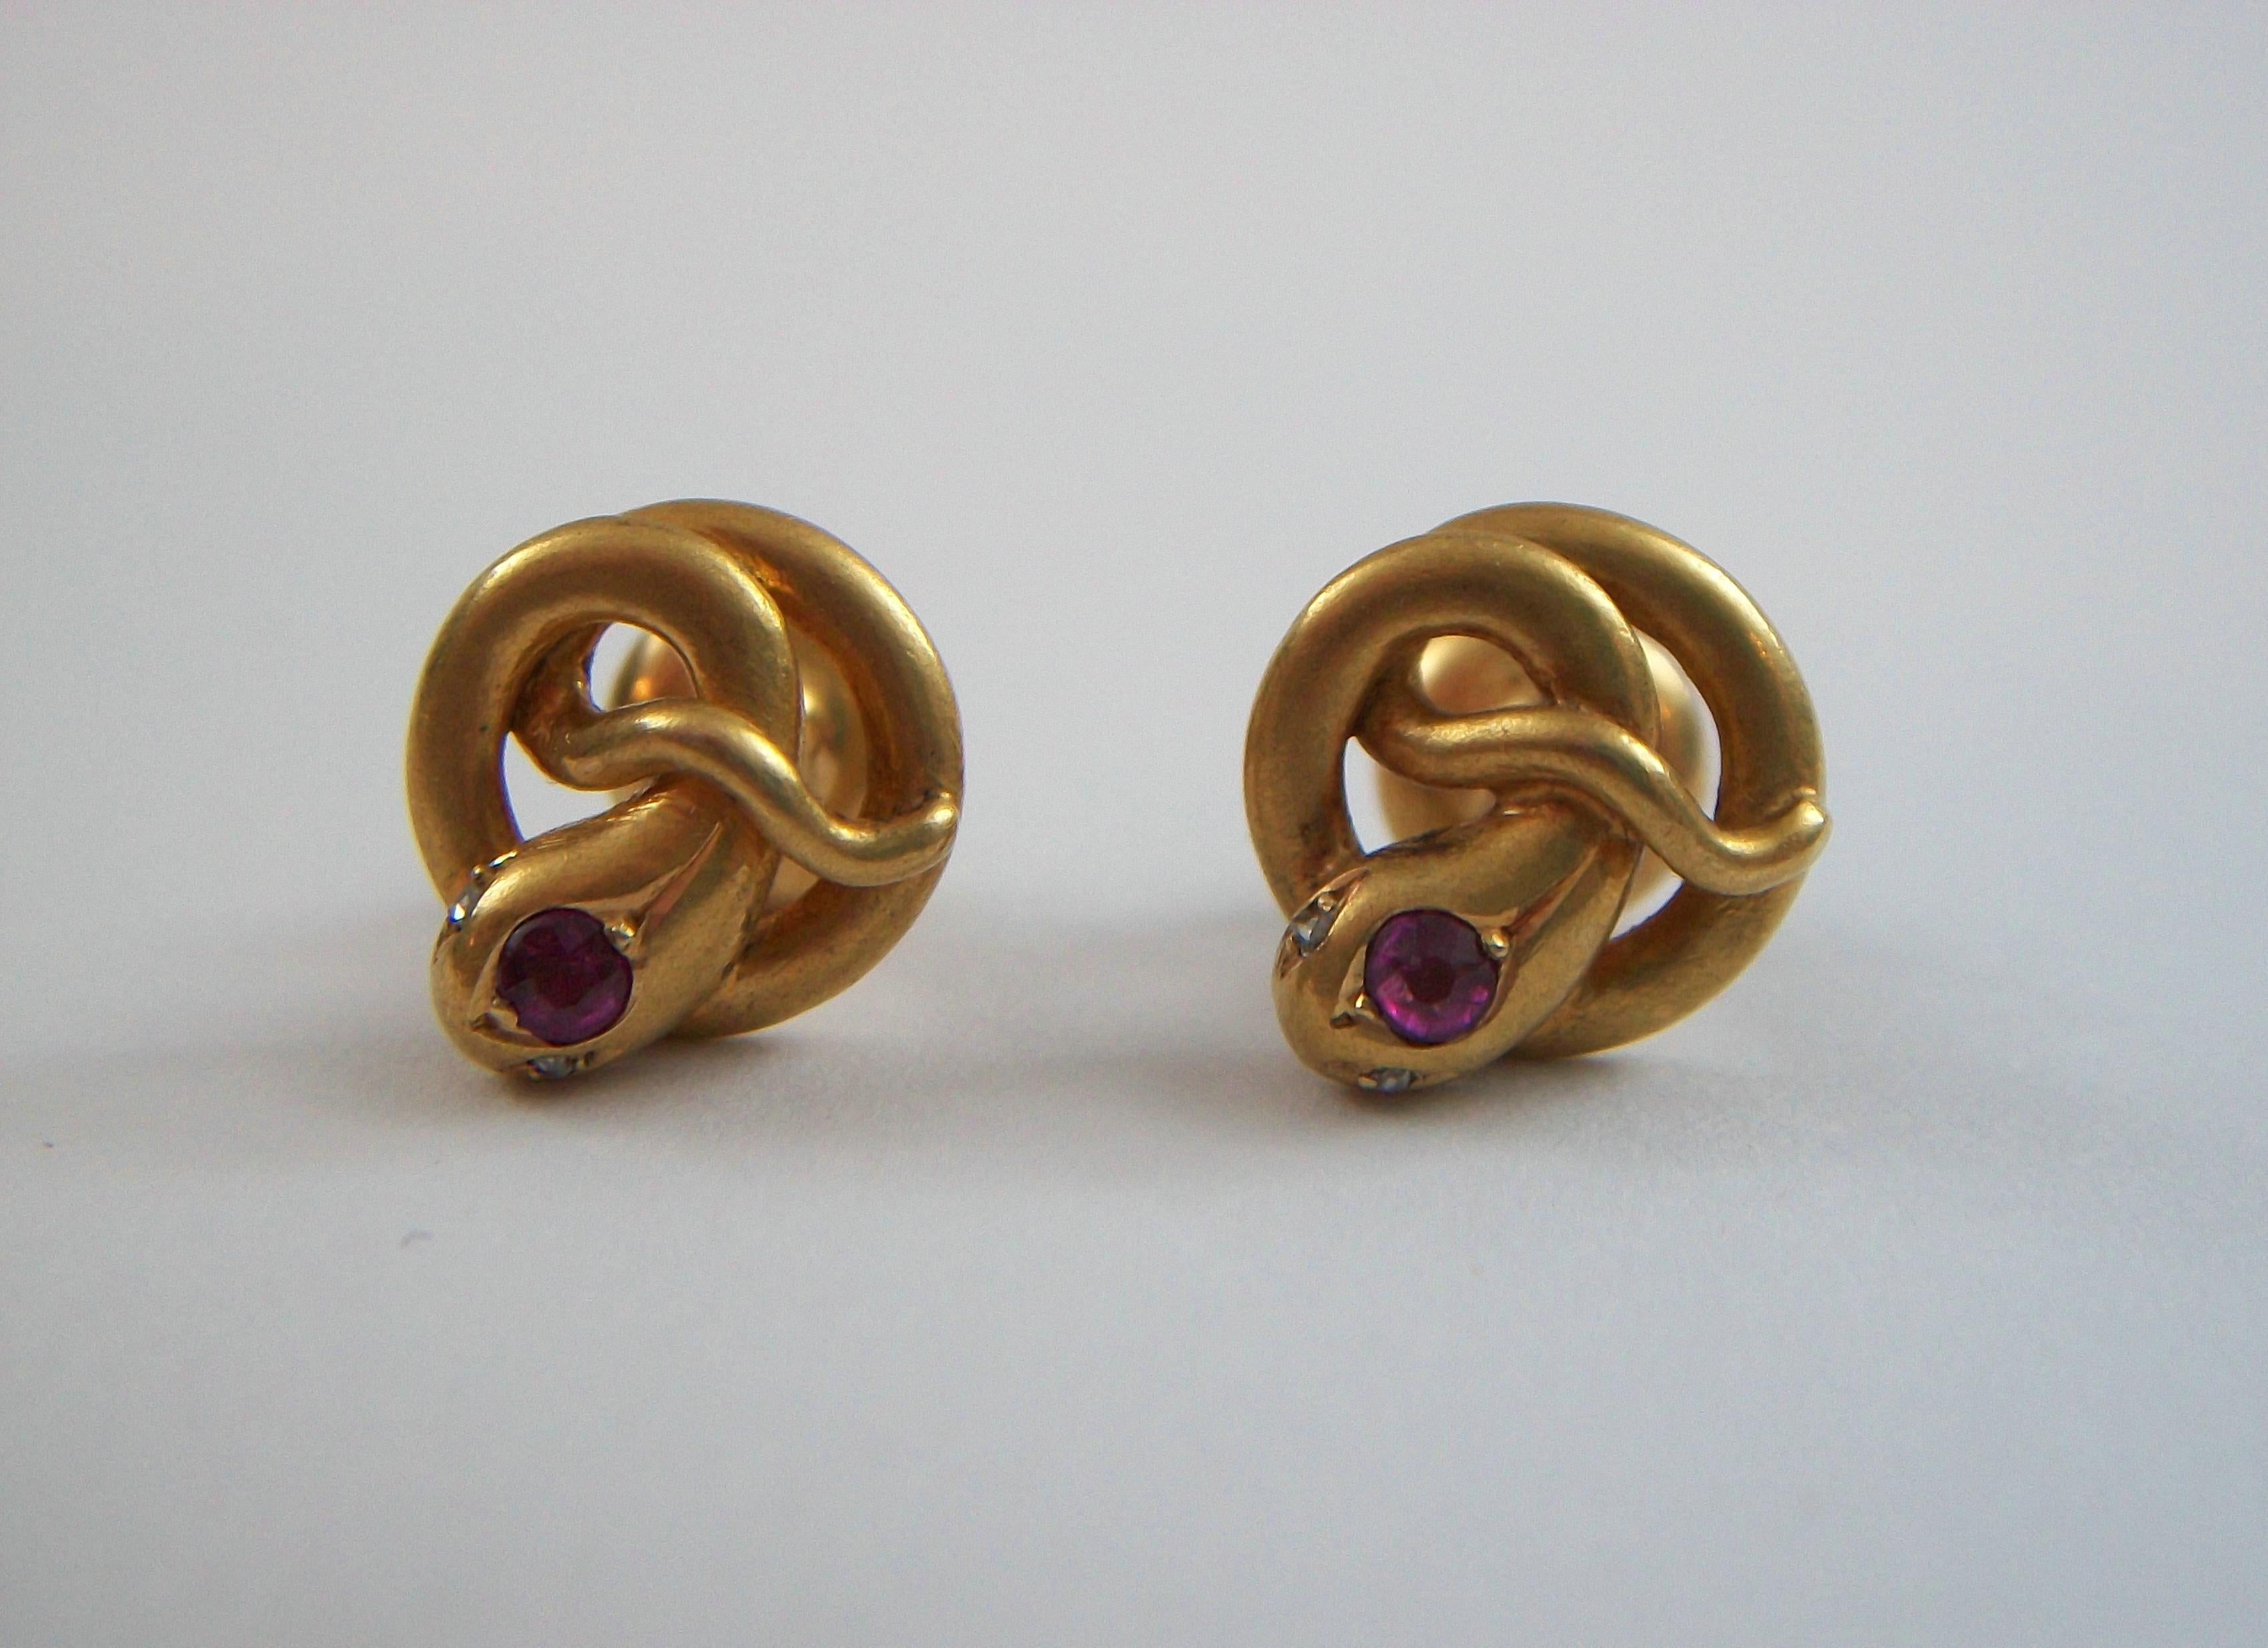 Victorian Antique Pair of 18K Yellow Gold Snake Buttons - France - Late 19th Century For Sale